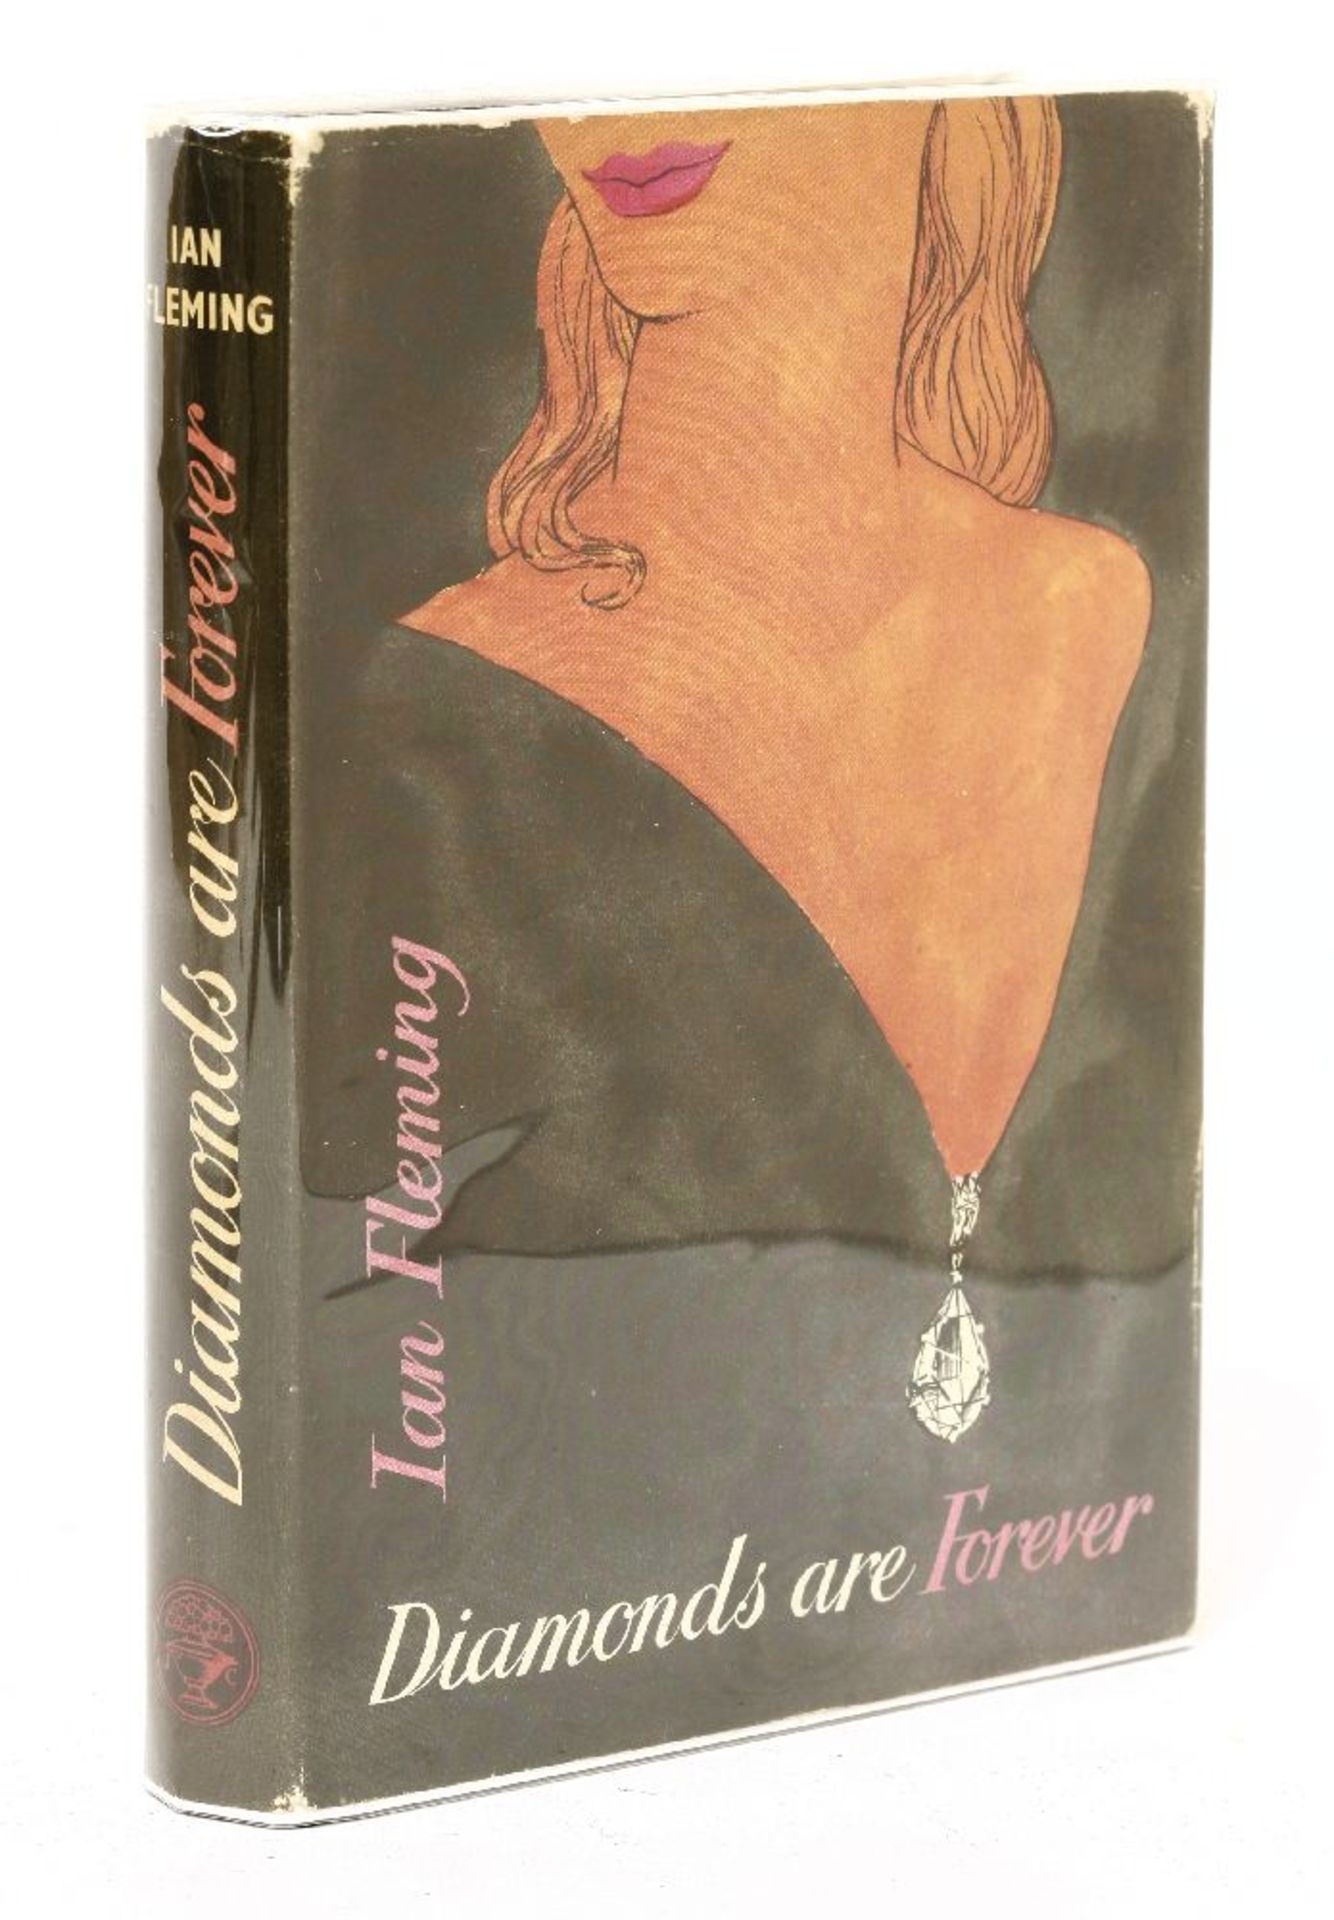 FLEMING, Ian: Diamonds Are Forever. J. Cape, 1956, First edition, first printing, in pictorial